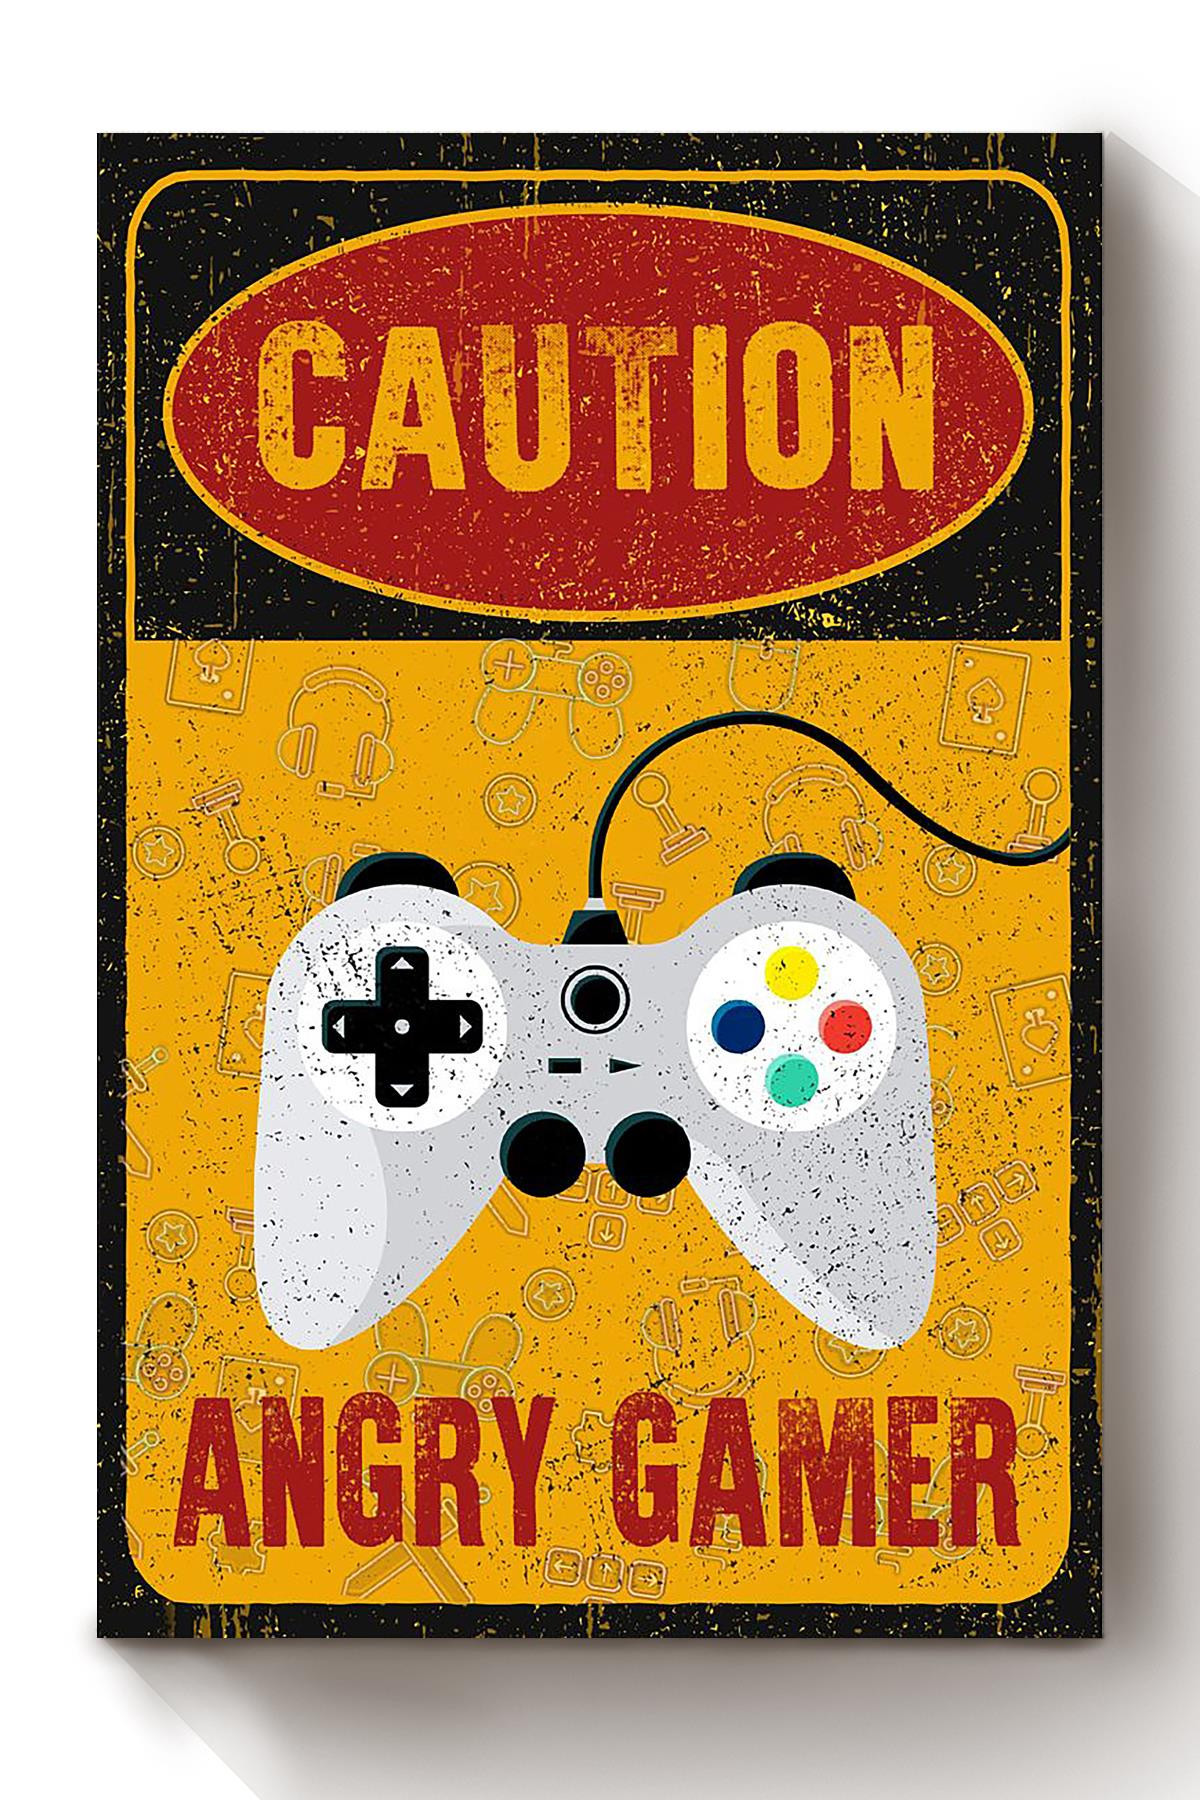 Caution Angry Gamer Canvas, Video Game , For Gamer Gift, Canvas Framed Prints, Canvas Paintings Wrapped Canvas 8x10